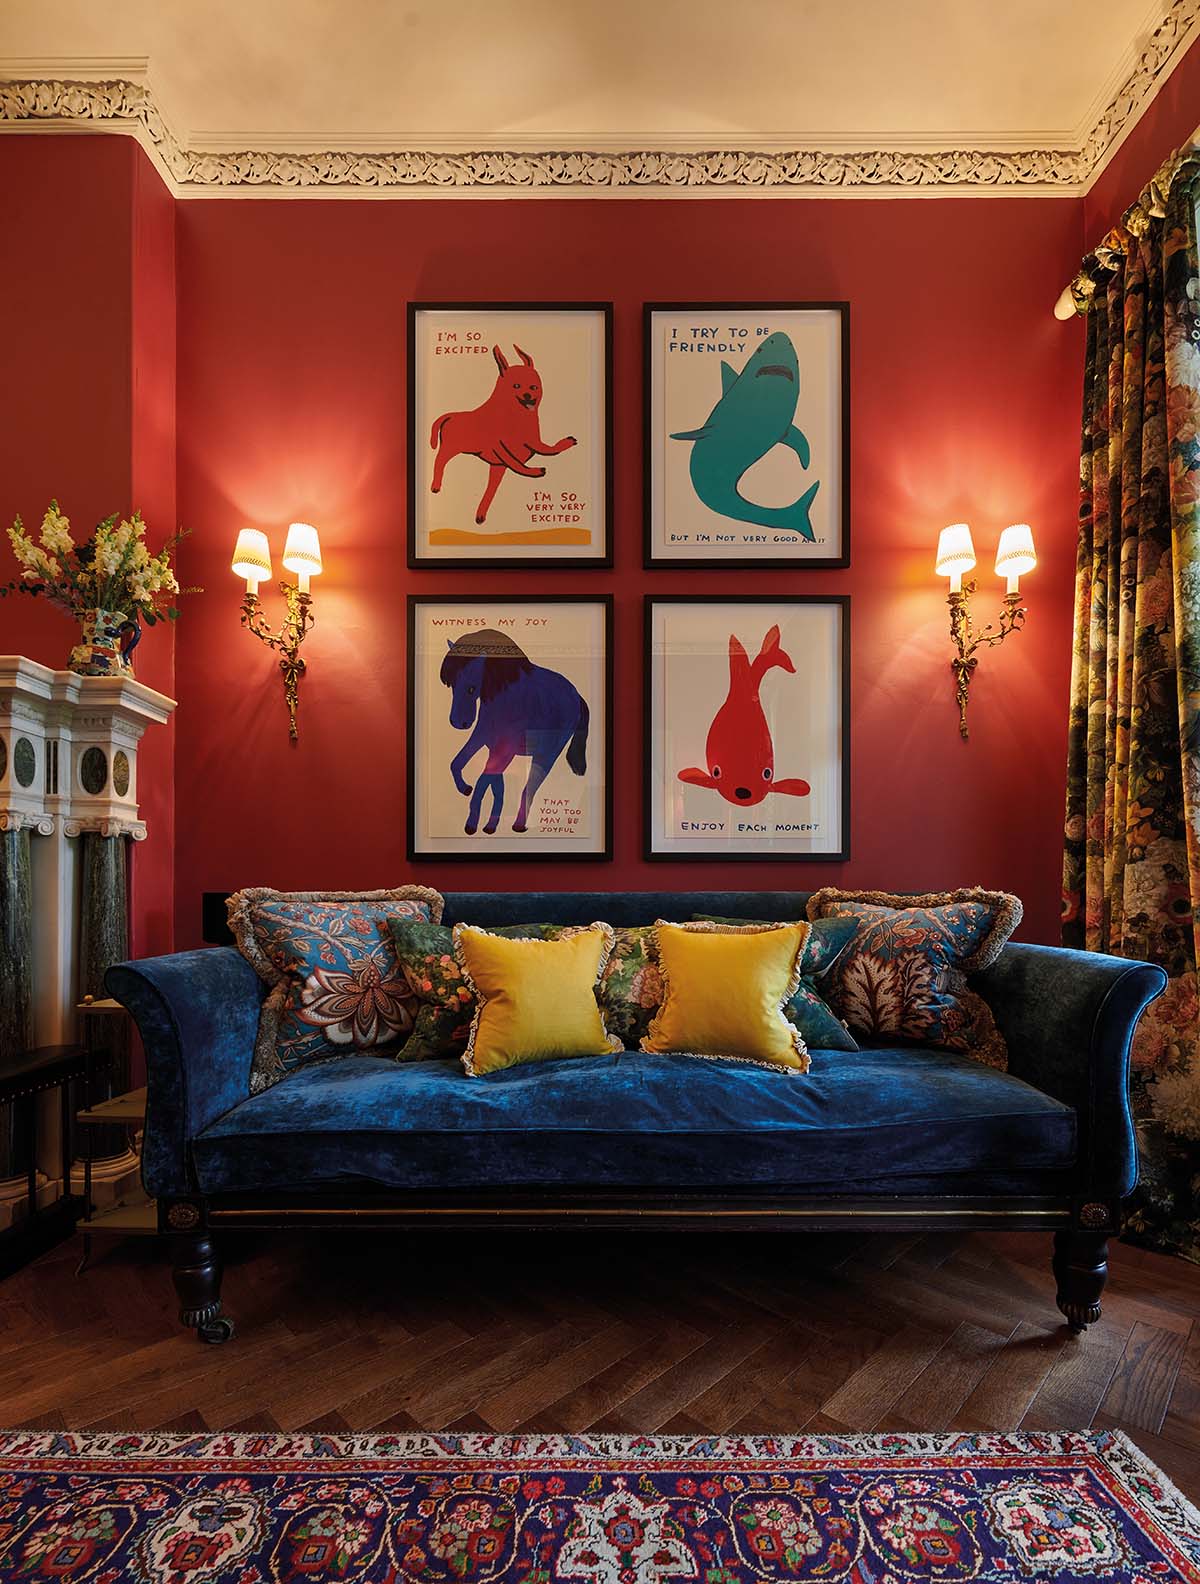 A seating area with a gallery wall which is painted red and a blue sofa